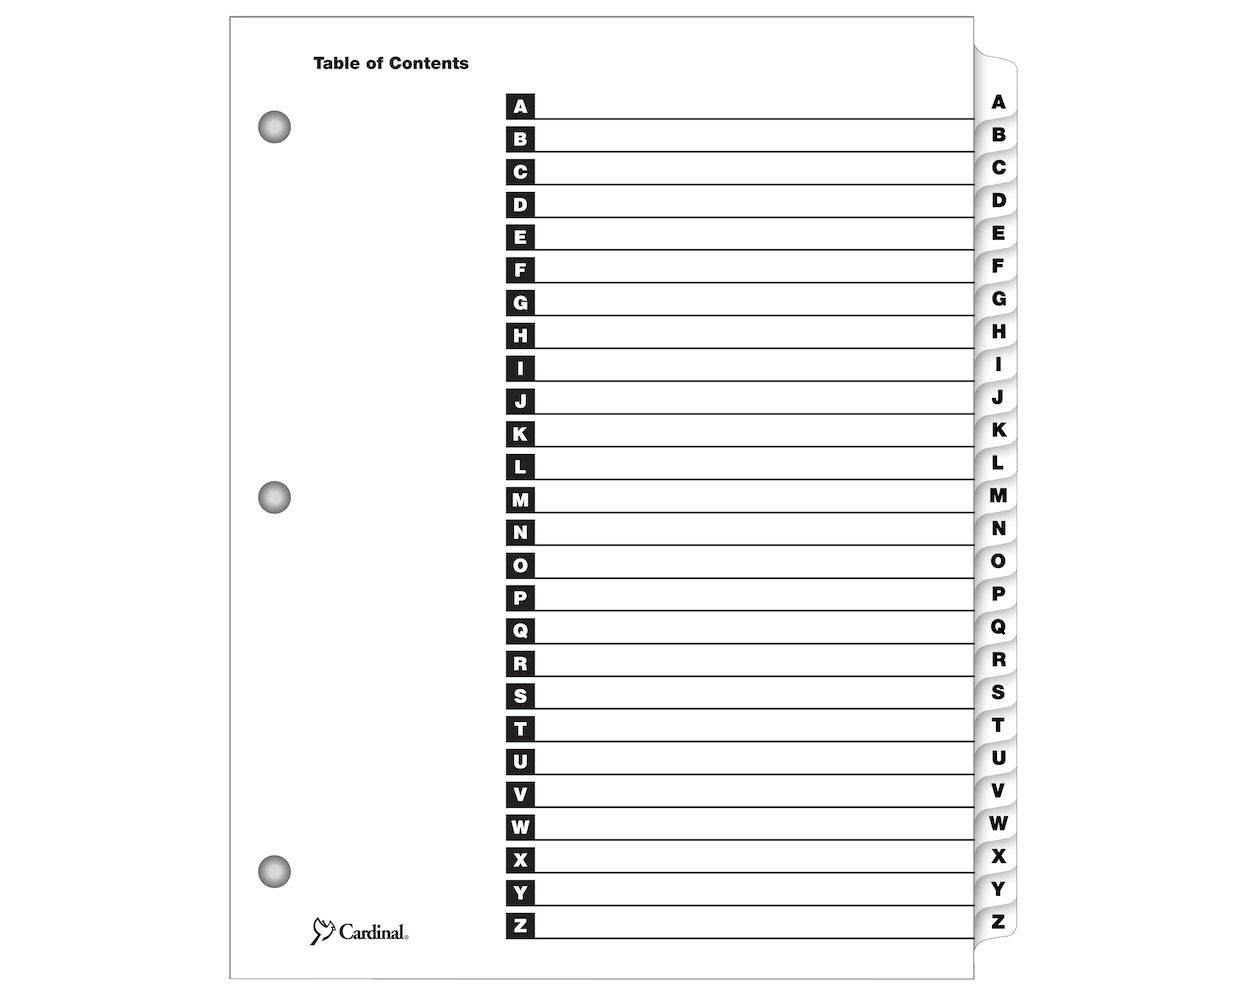 Printed1 8 X Divider Cardinal Onestep Printable Table Of Contents Dividers 